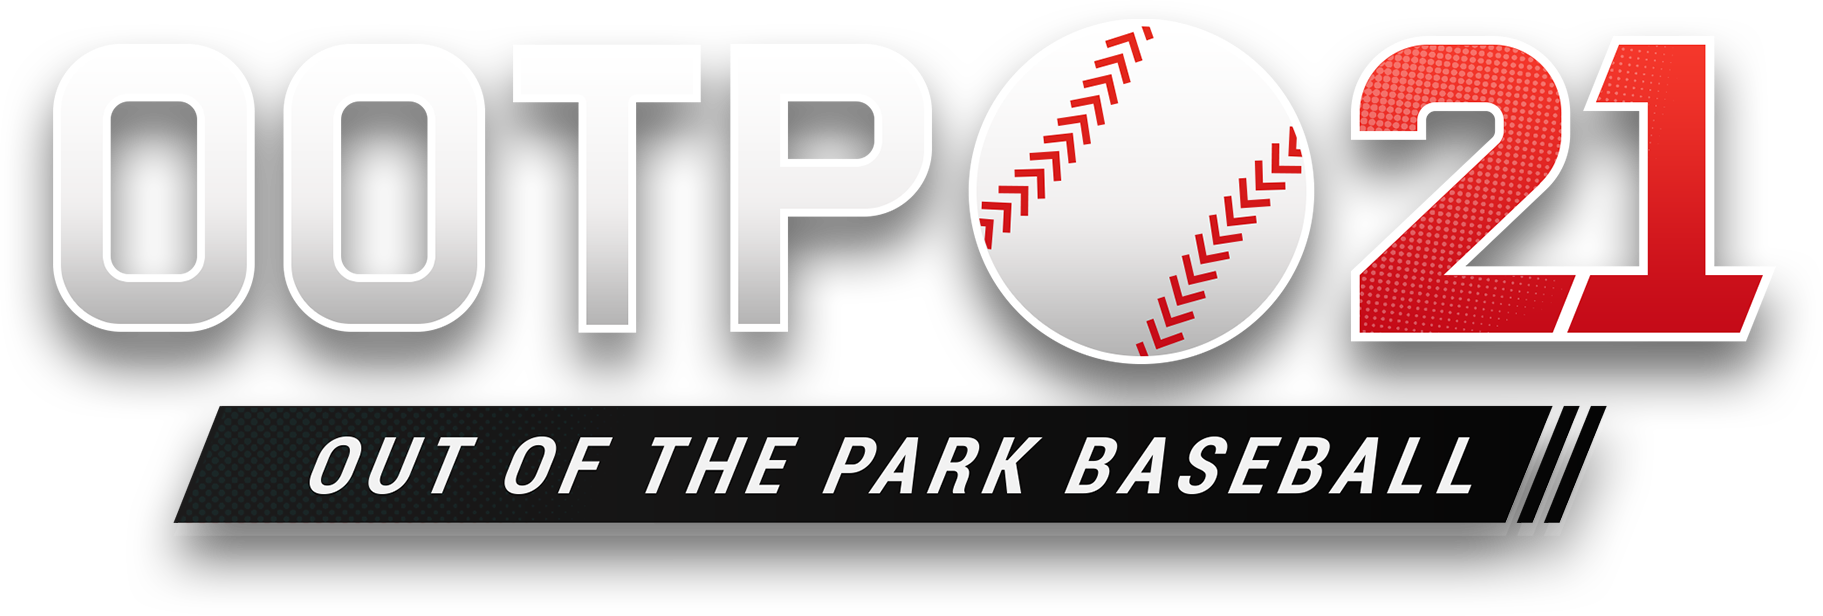 ootp baseball list all players and free agents